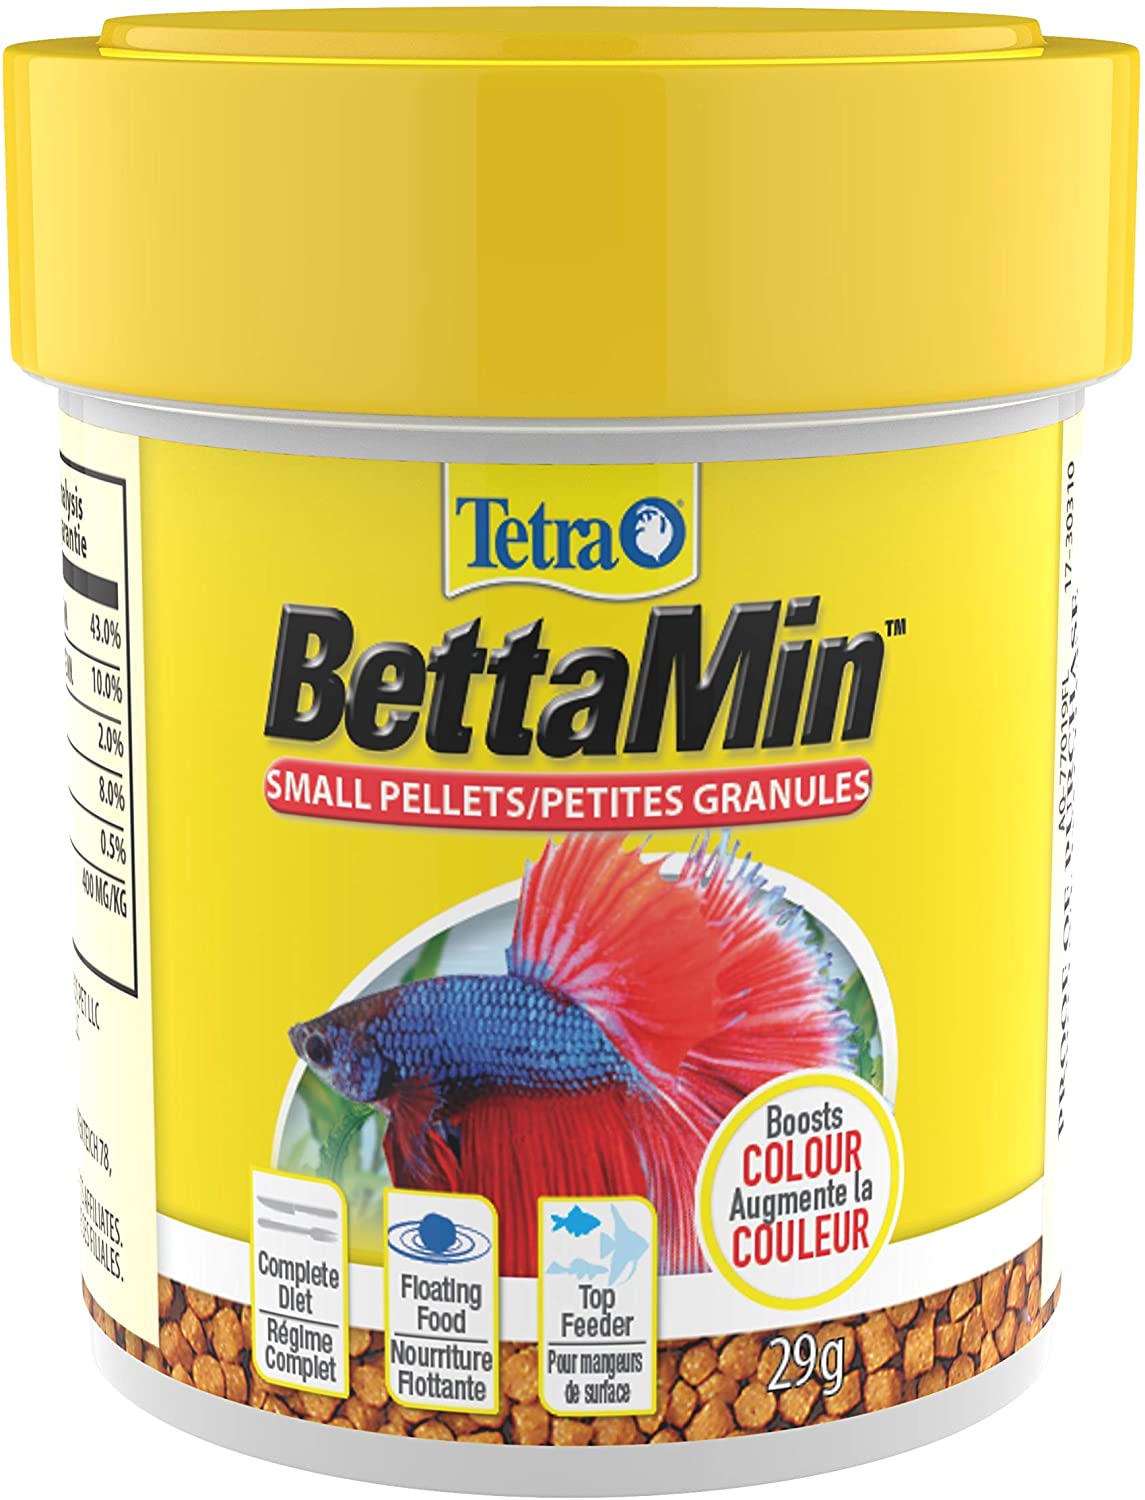 Best Betta Food - What to Feed Your Betta Fish | A Little ...